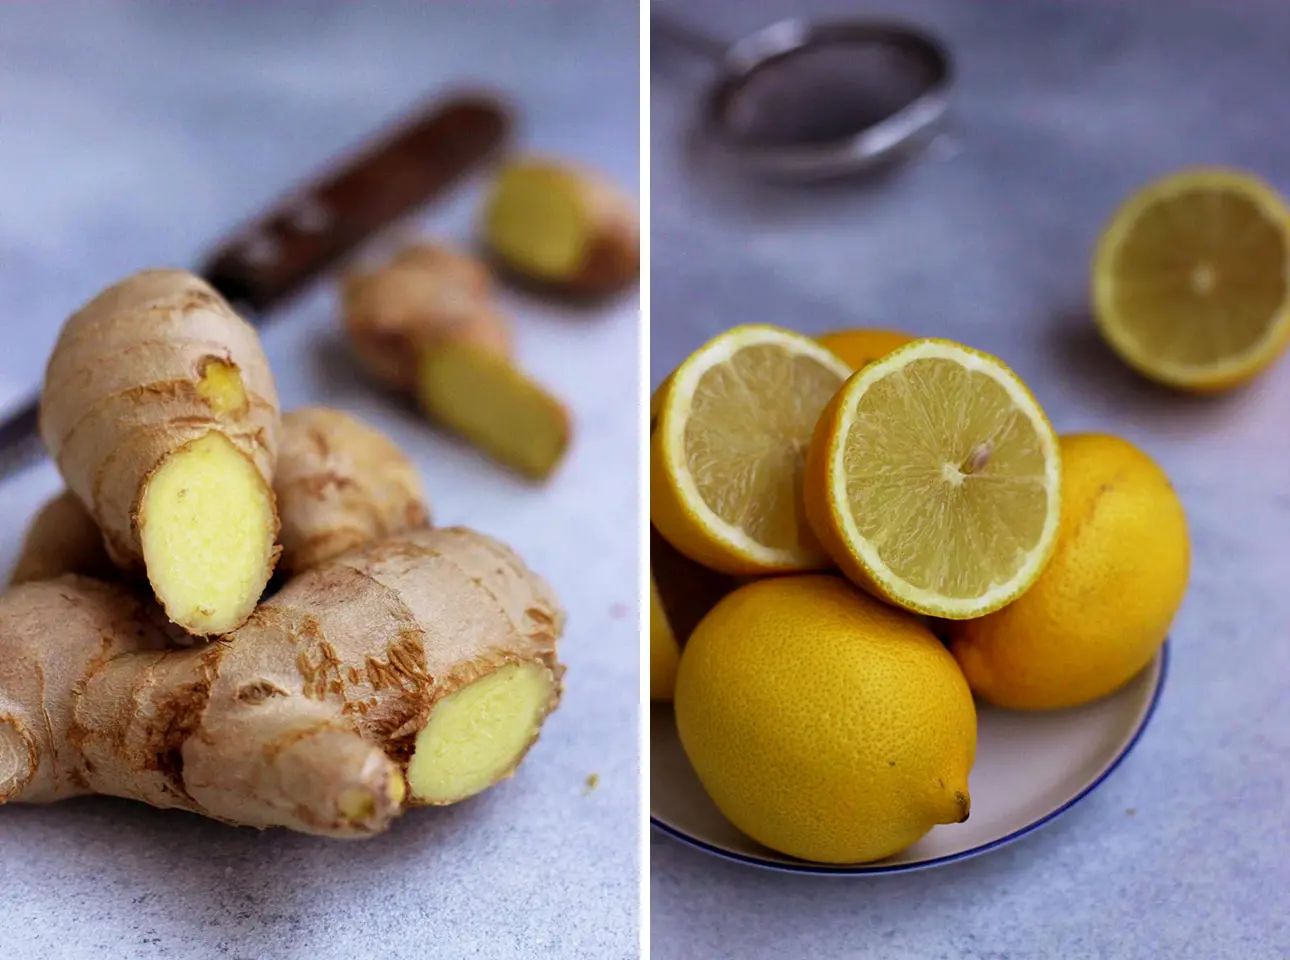 Collage of Ginger Root Next to Lemons.